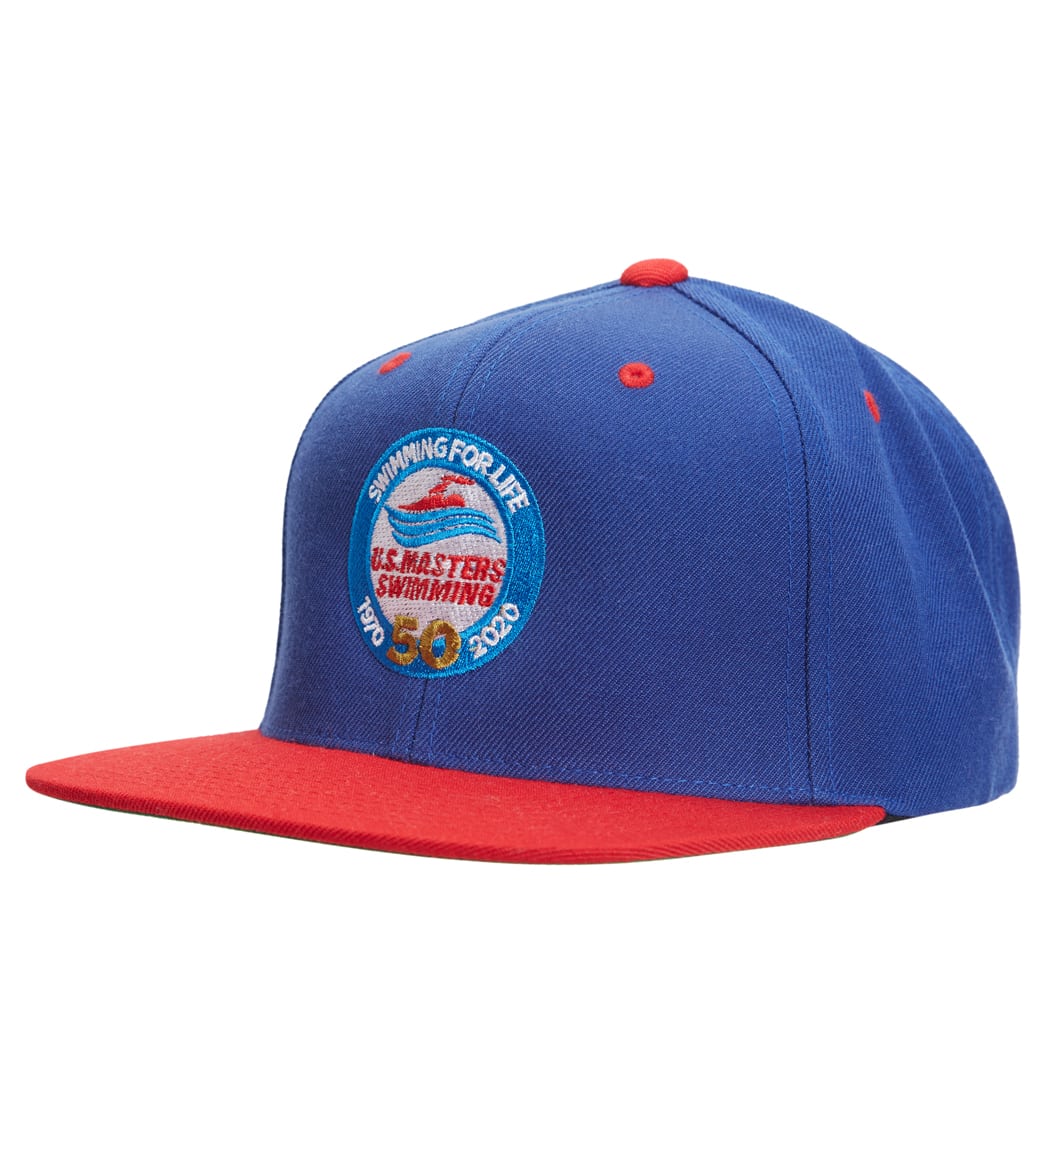 U.s. Masters Swimming Usms 50Th Anniversary Snapback Cap - True Royal/True Red One Size - Swimoutlet.com